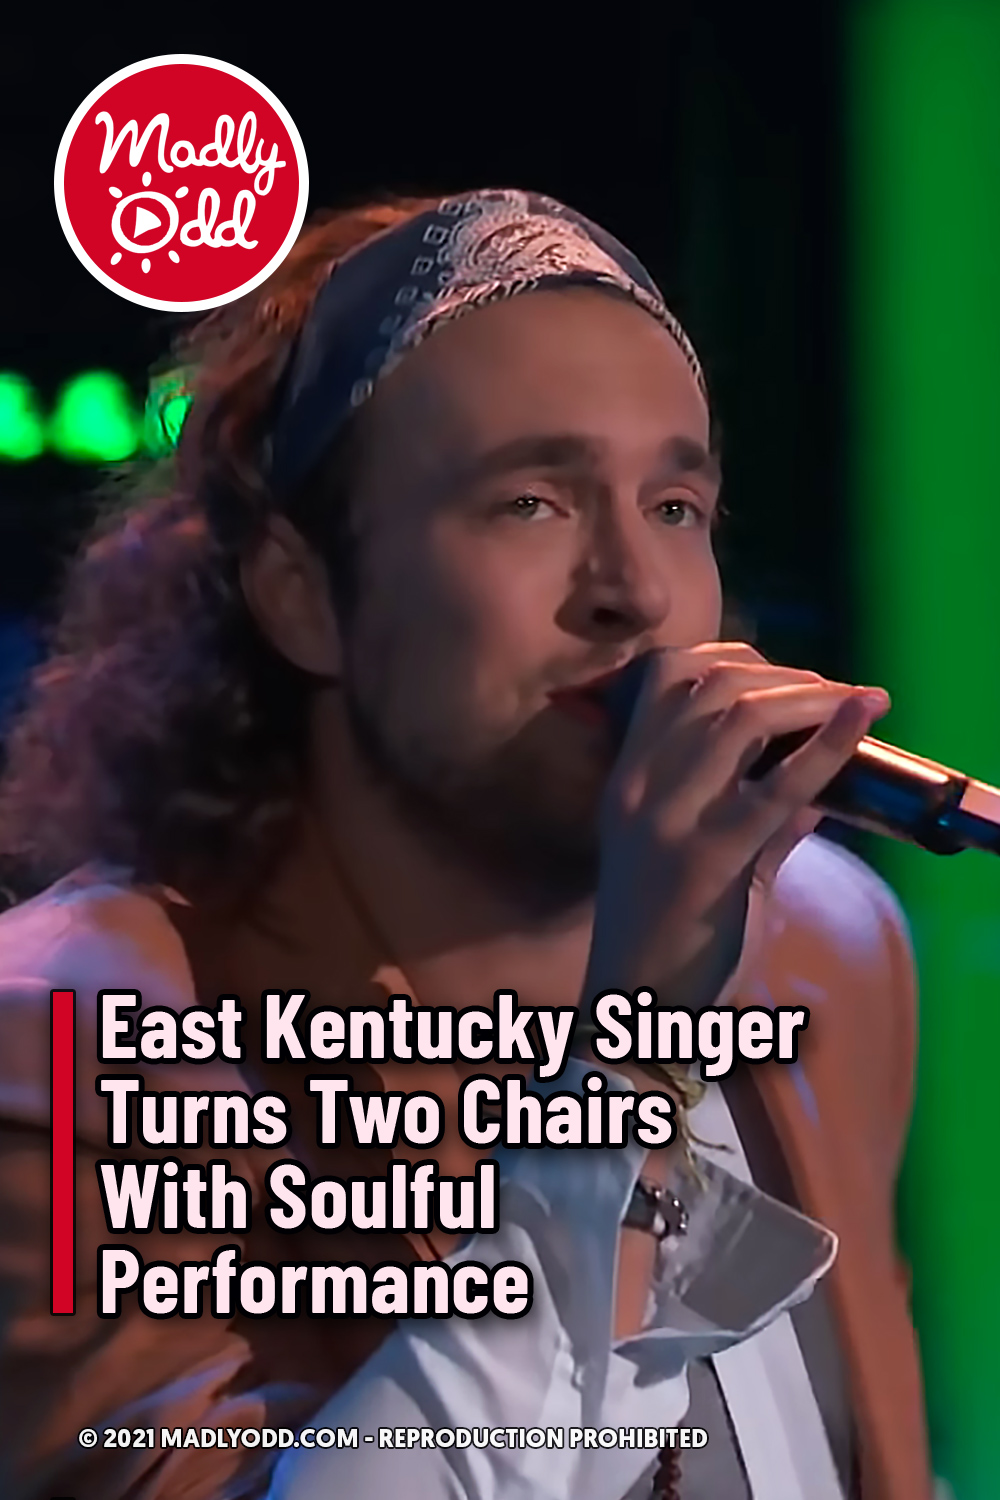 East Kentucky Singer Turns Two Chairs With Soulful Performance